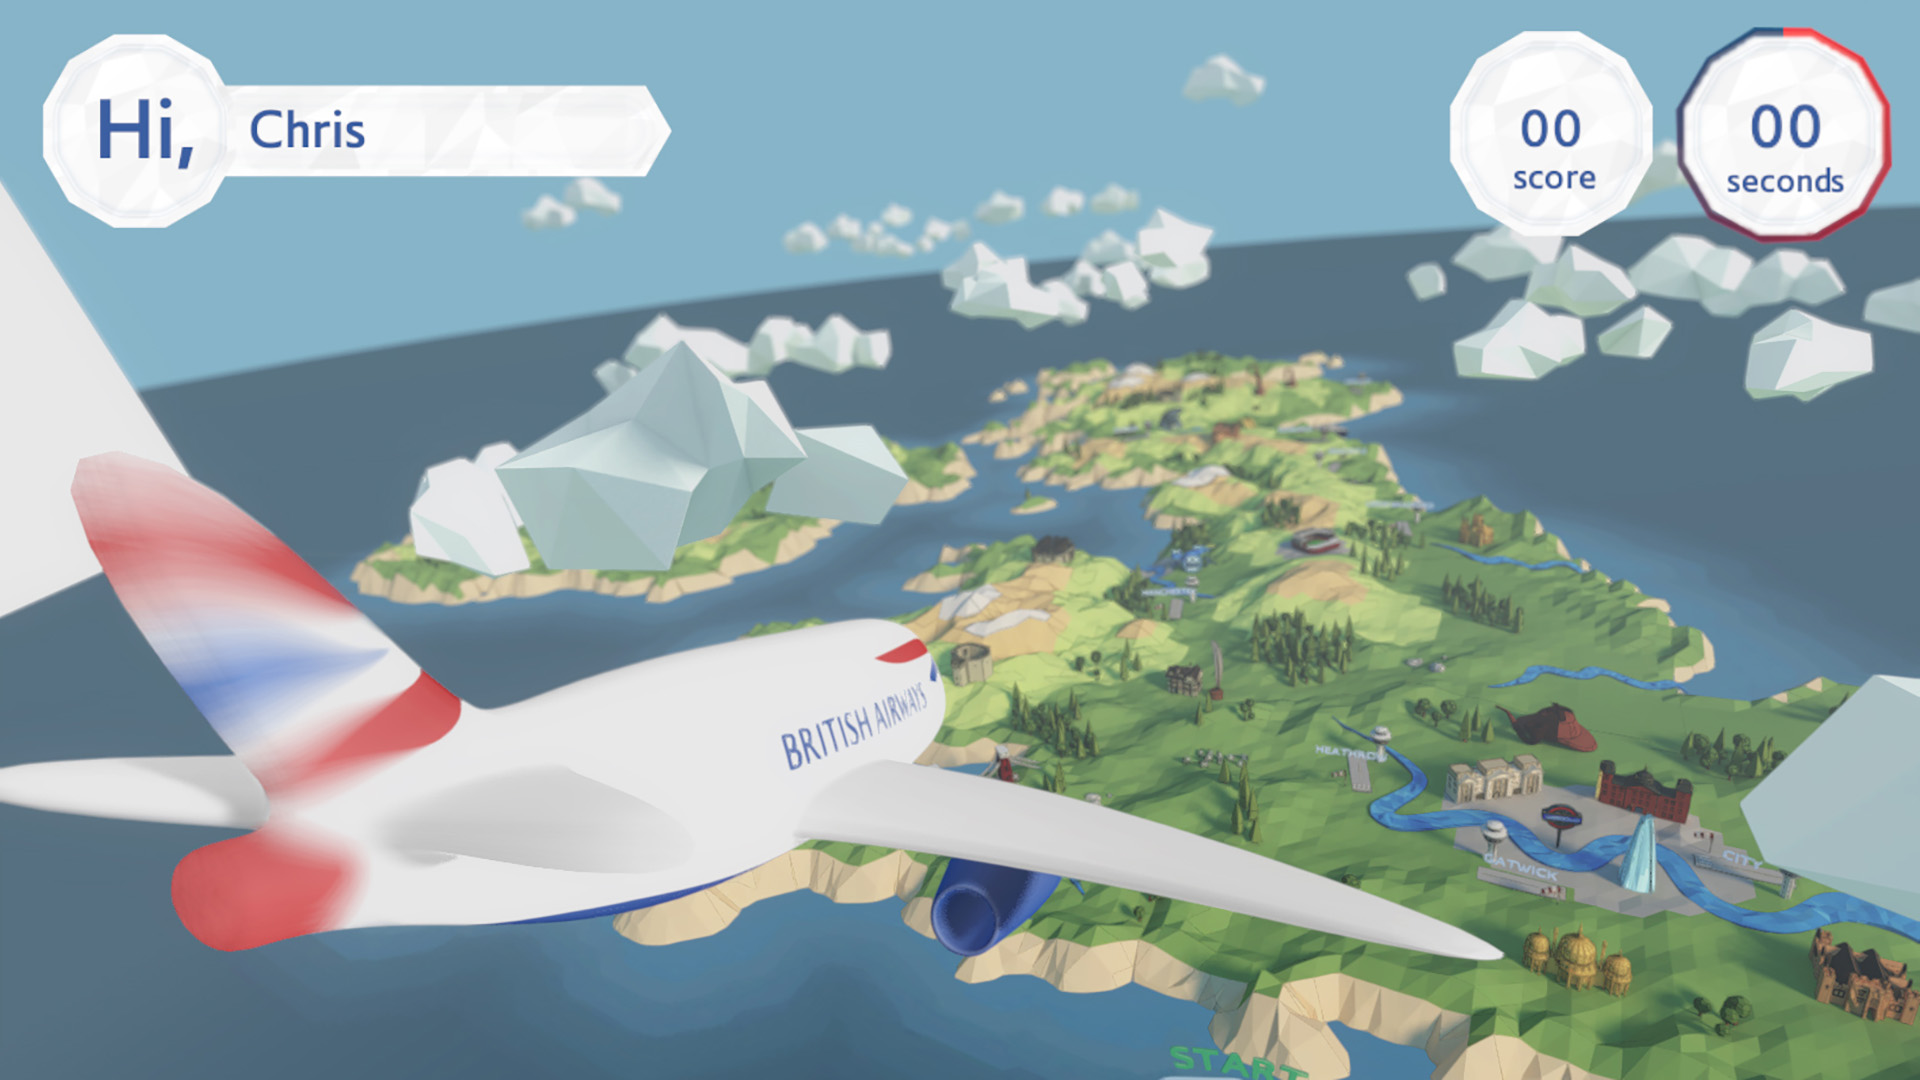 game view of british airways flight game. back view of a plane flying across the british isles